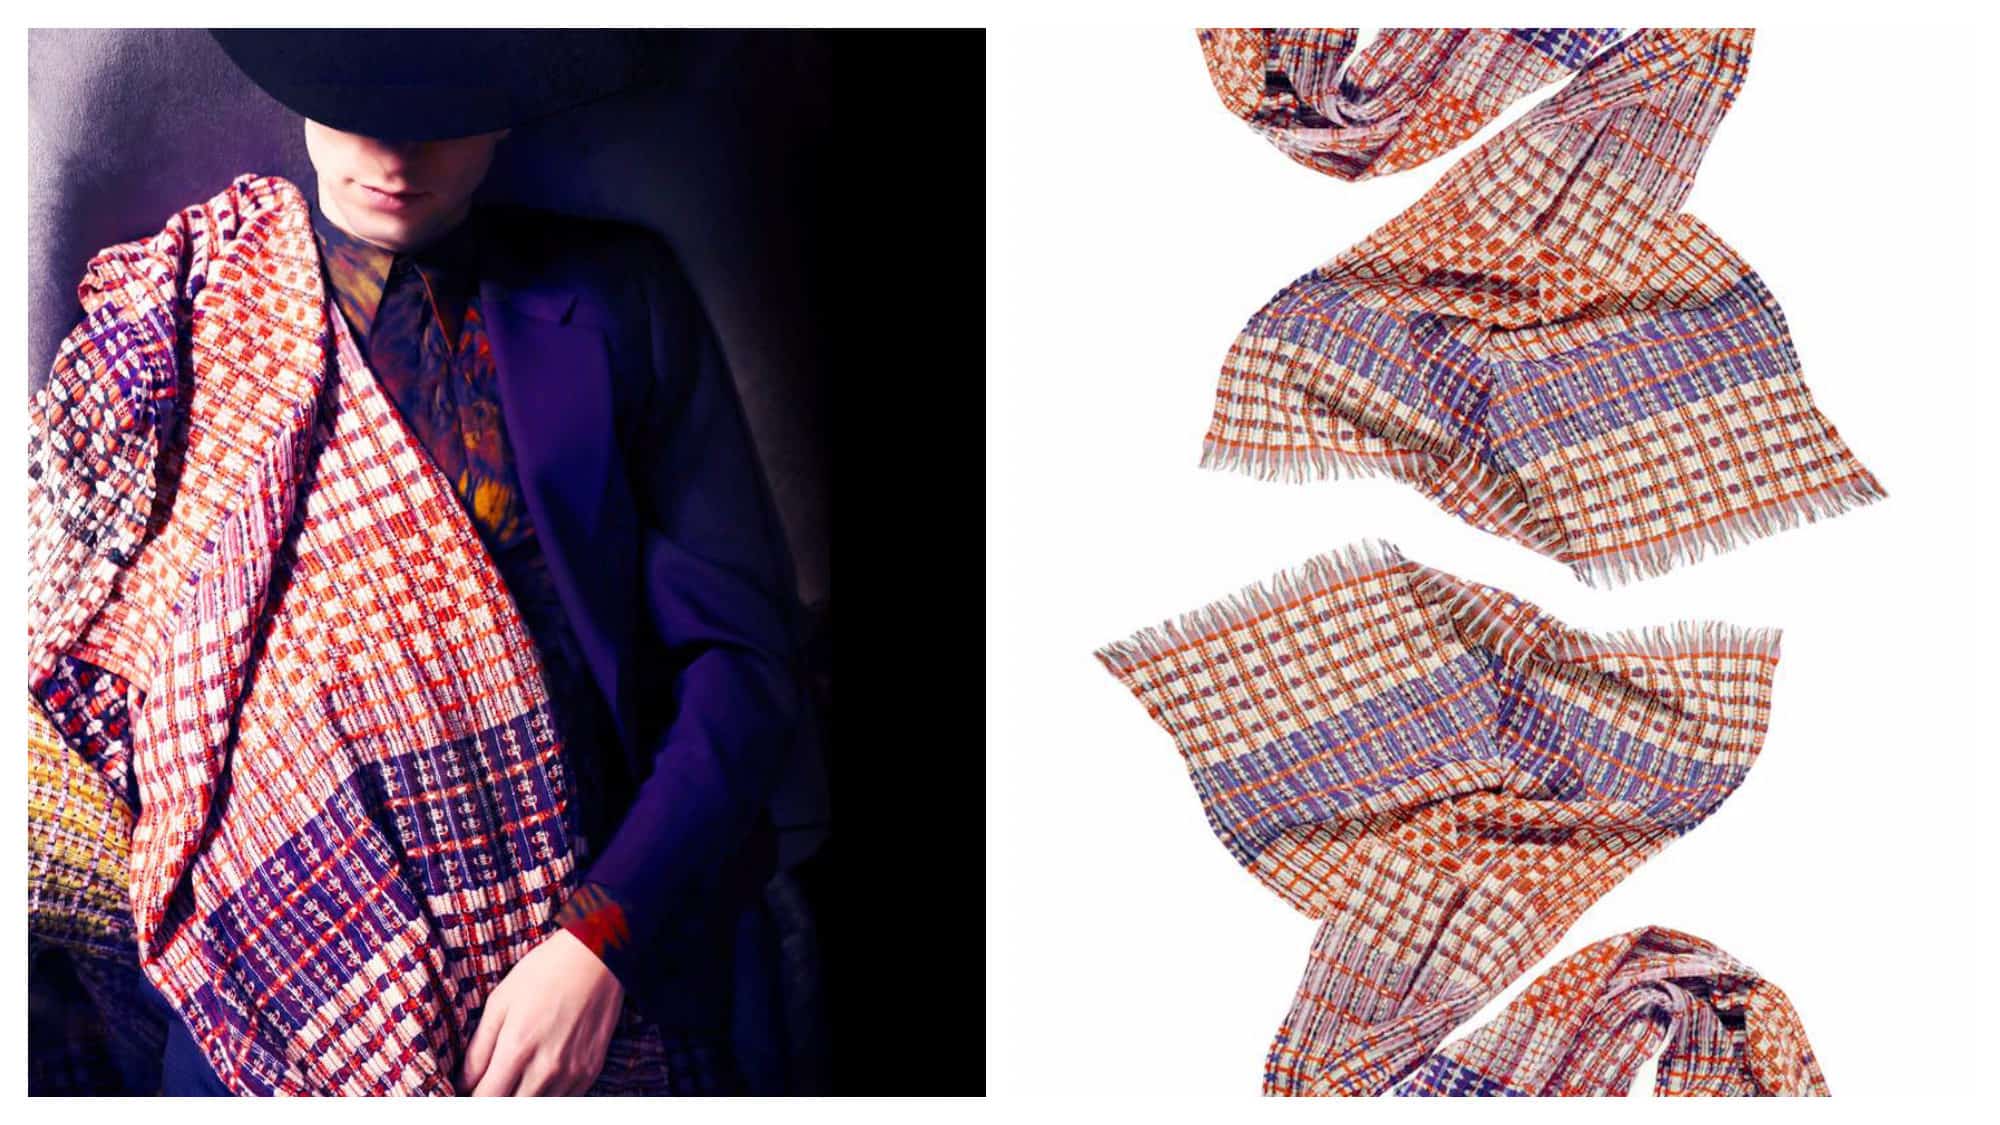 French accessories brand EPICE scarves.